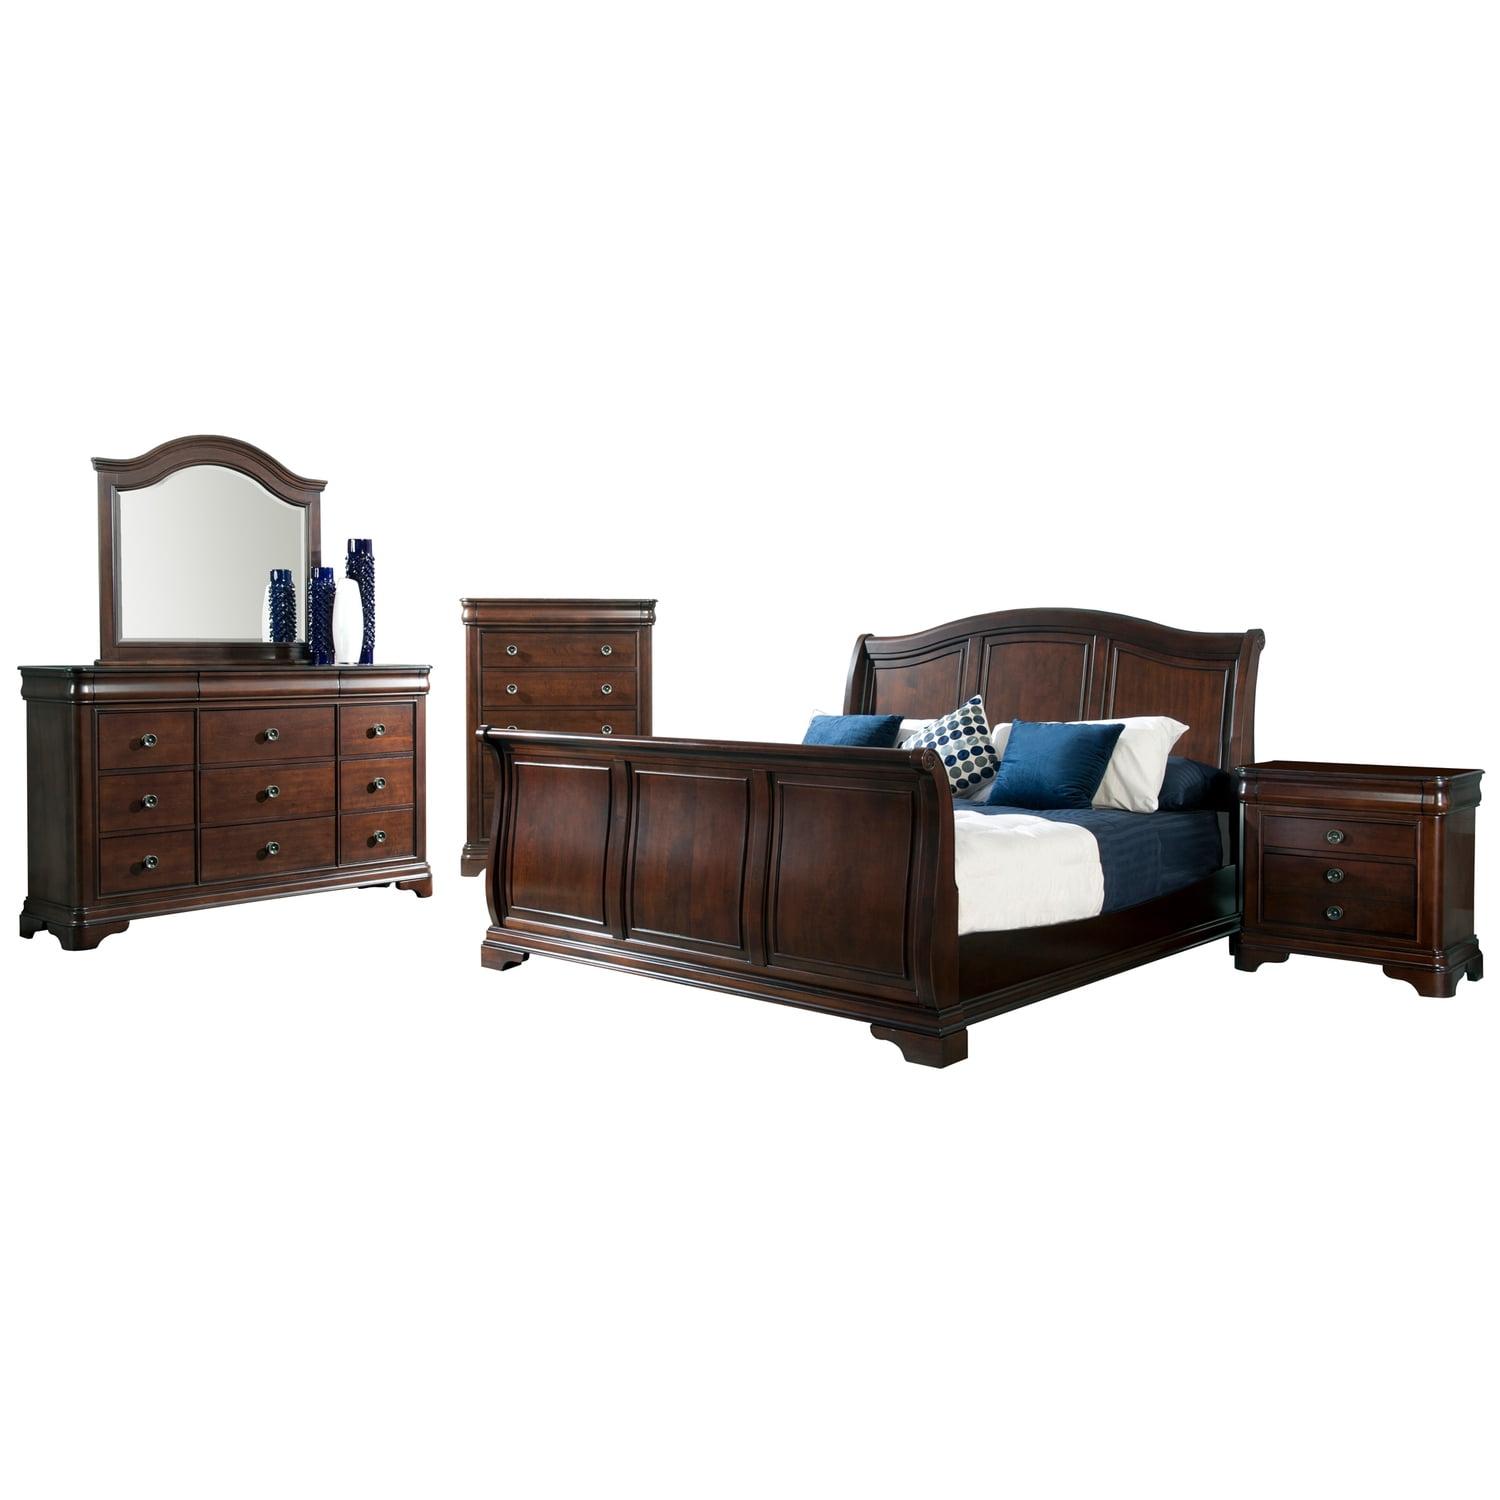 Cherry Sleigh Queen Bedroom Set with Carved Panels and Ample Storage